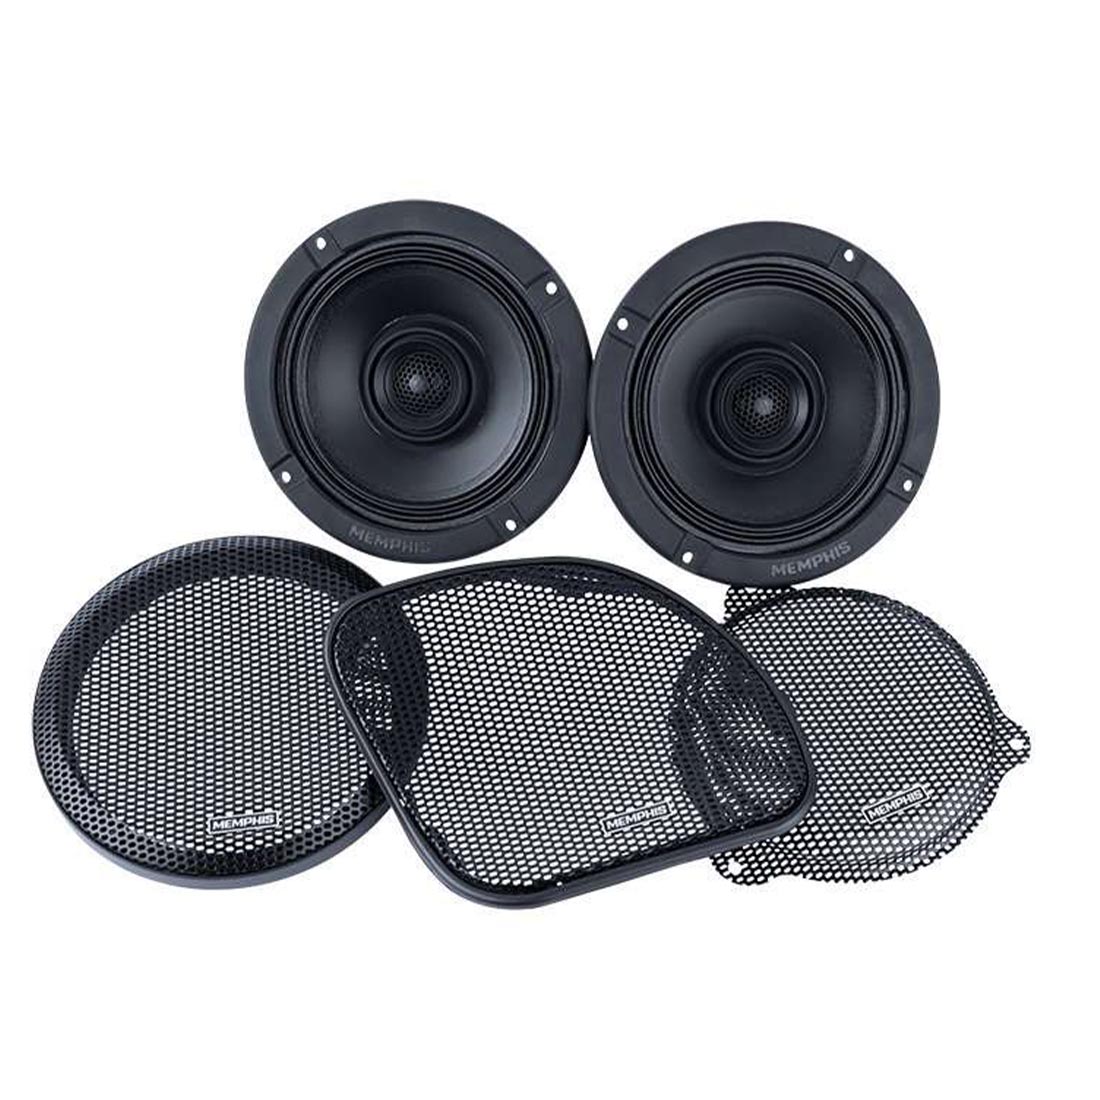 Memphis Audio MXAHDPRO2 6.5" Speaker Motorcycle Audio compatible with Harley Davidson Direct OEM Kits